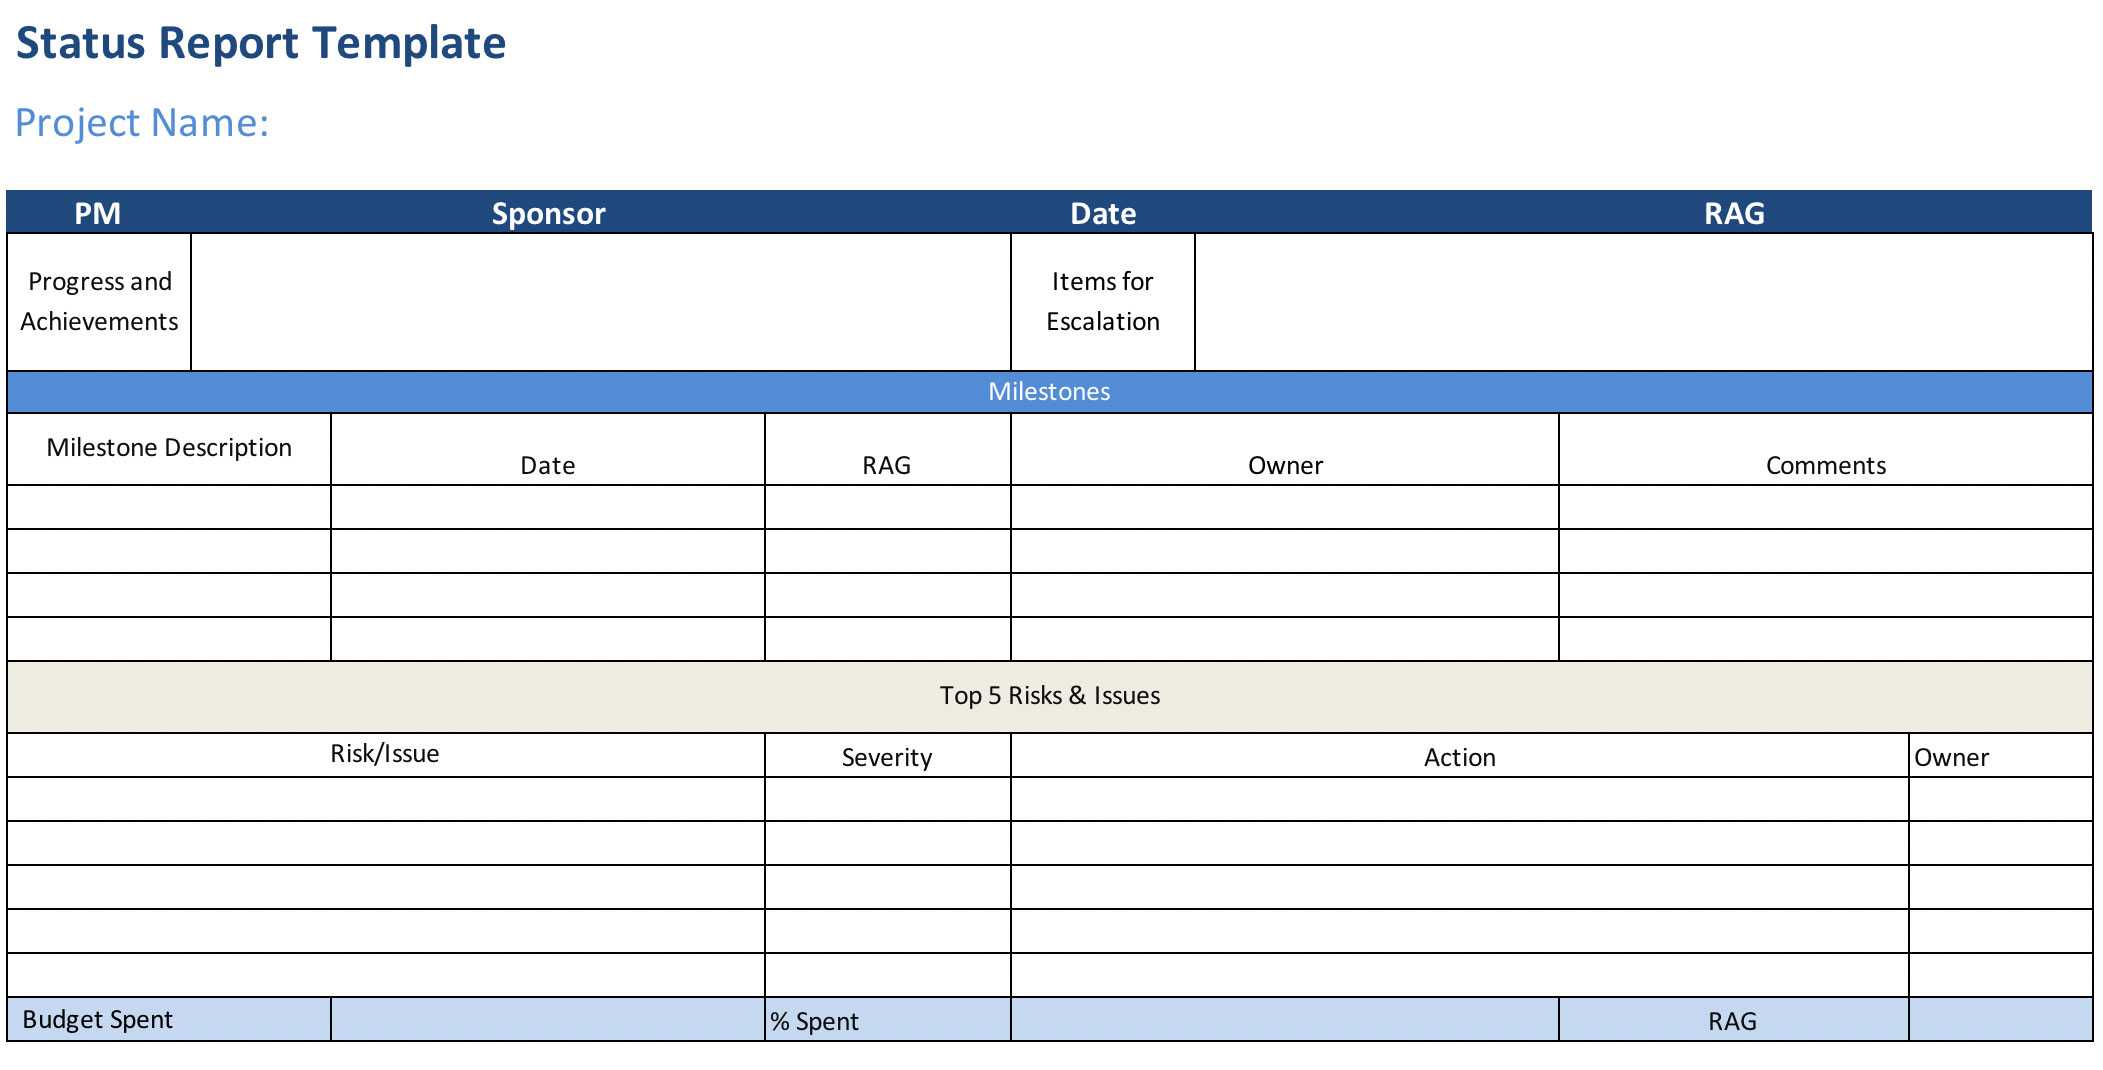 Project Status Report (Free Excel Template) – Projectmanager Throughout Engineering Progress Report Template